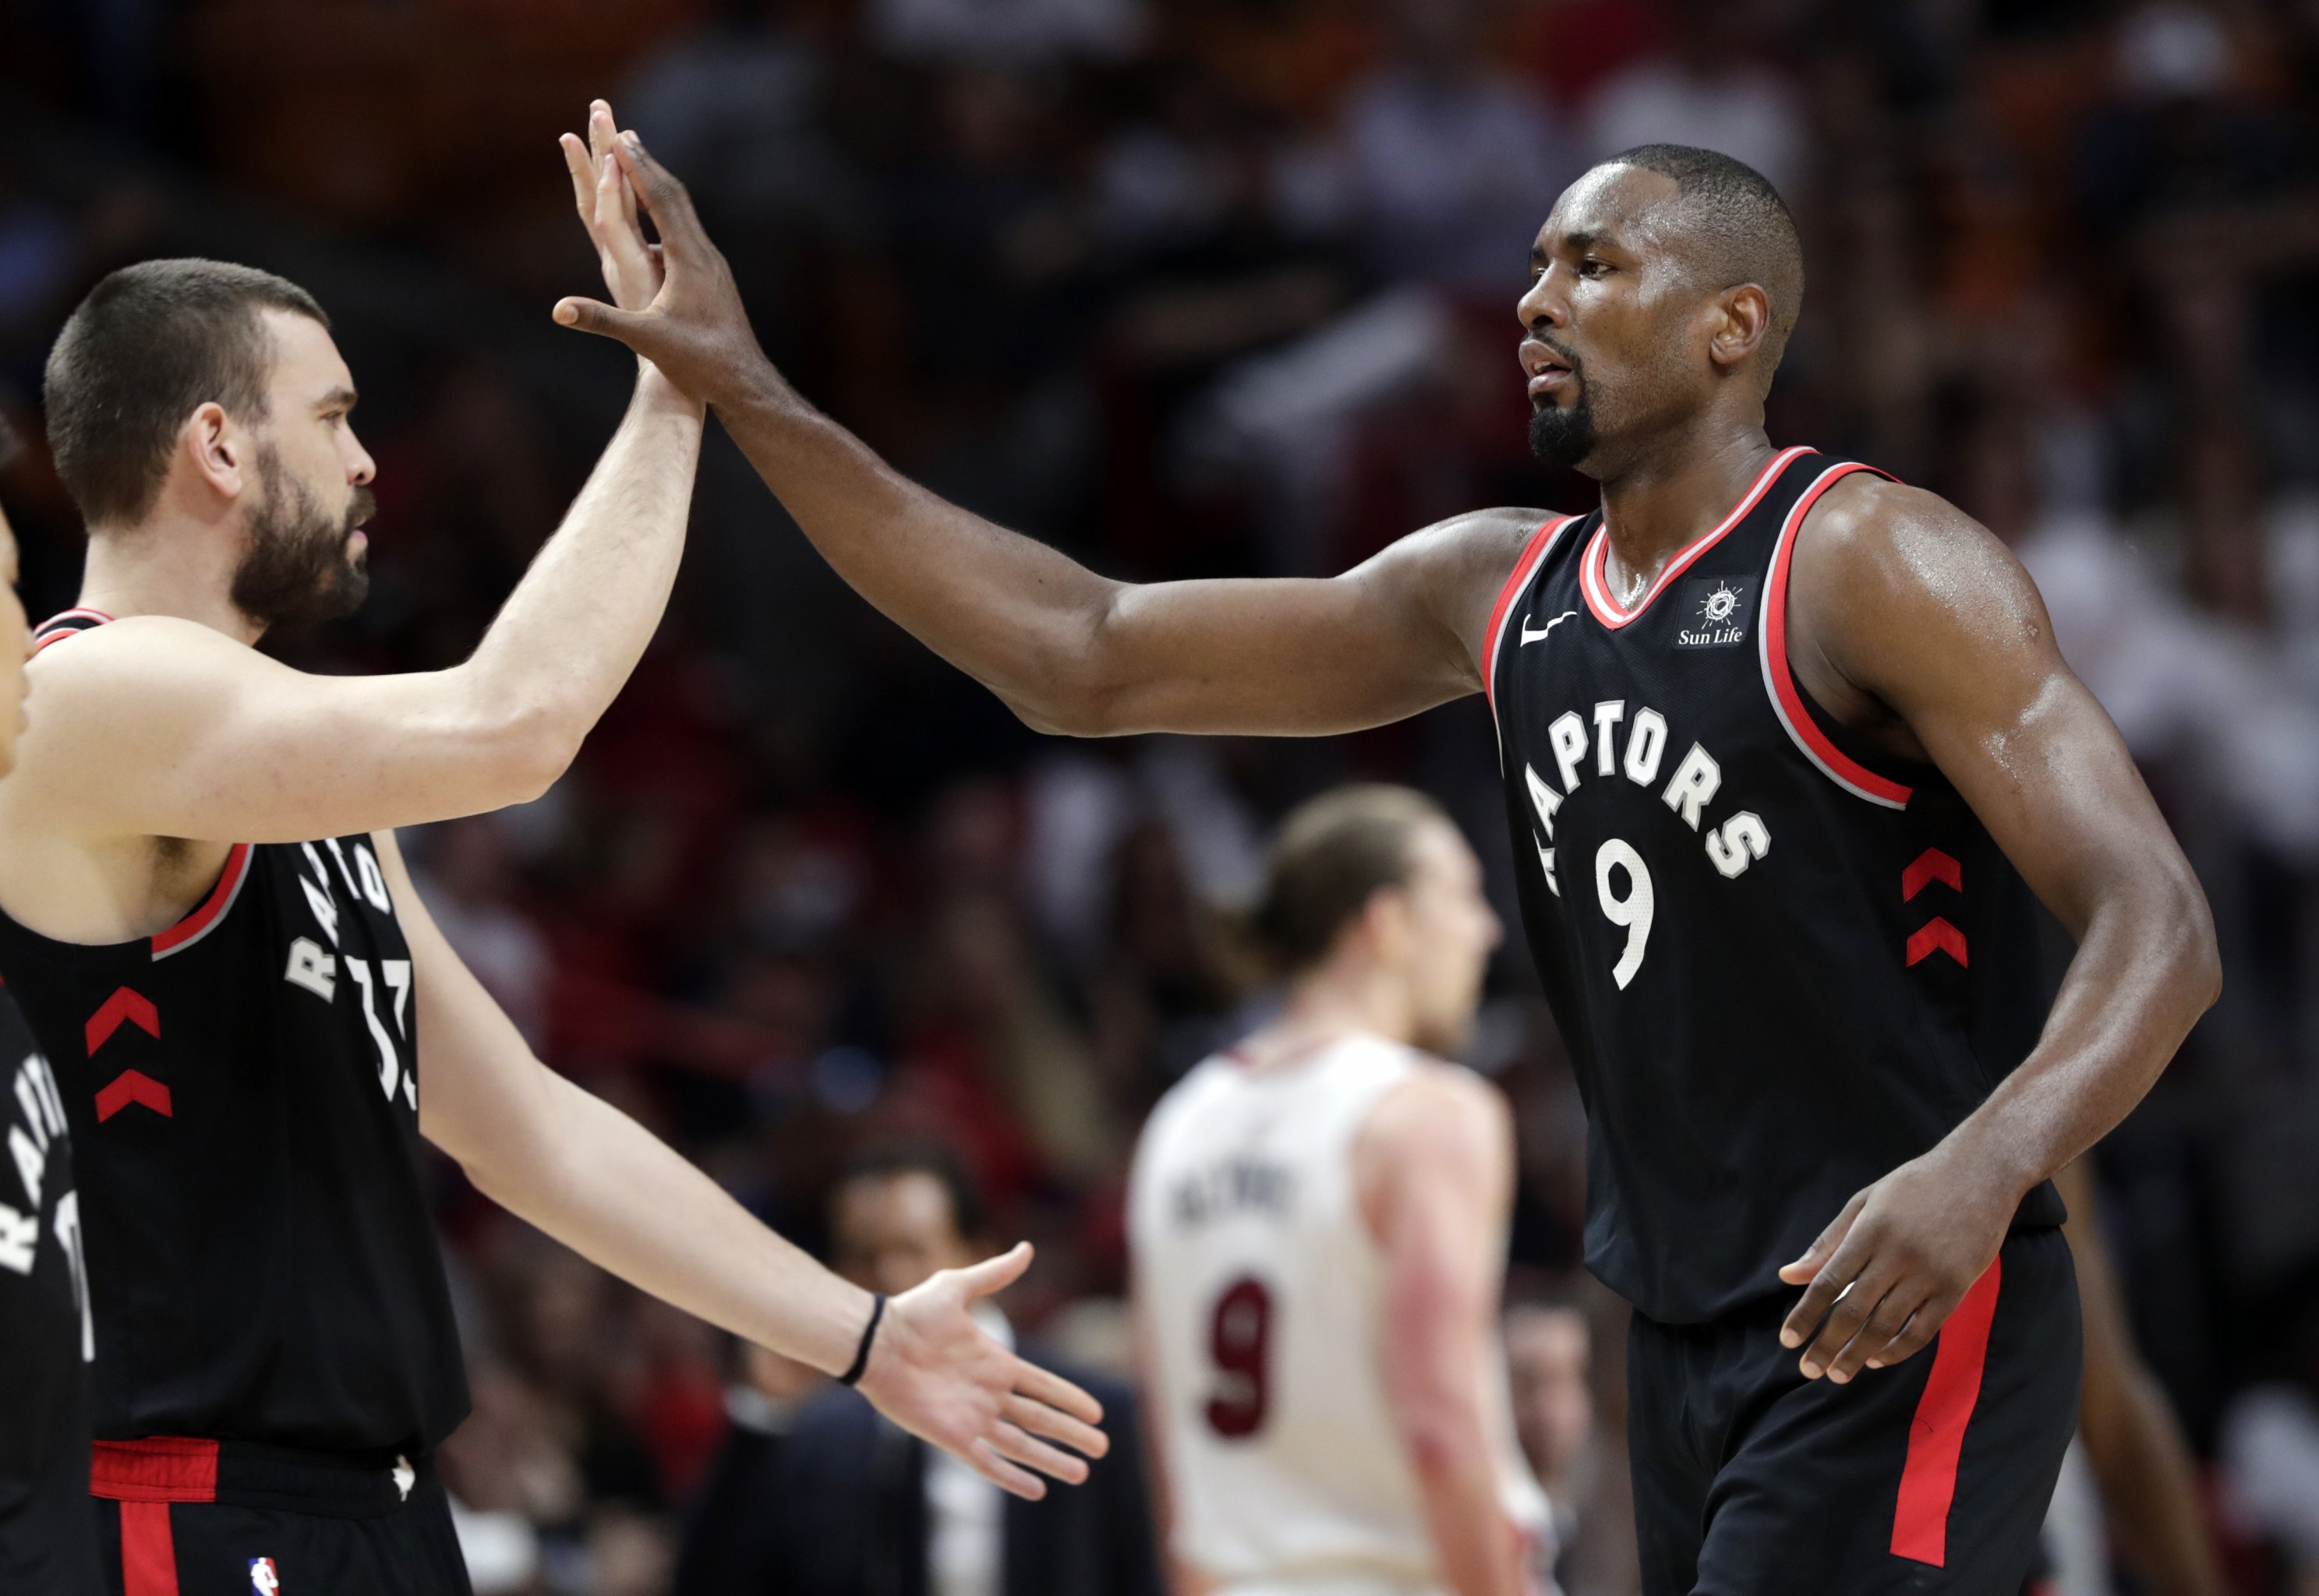 The Boston Celtics' huge loss to the Toronto Raptors highlights just how  much they're missing Aron Baynes on the defensive end